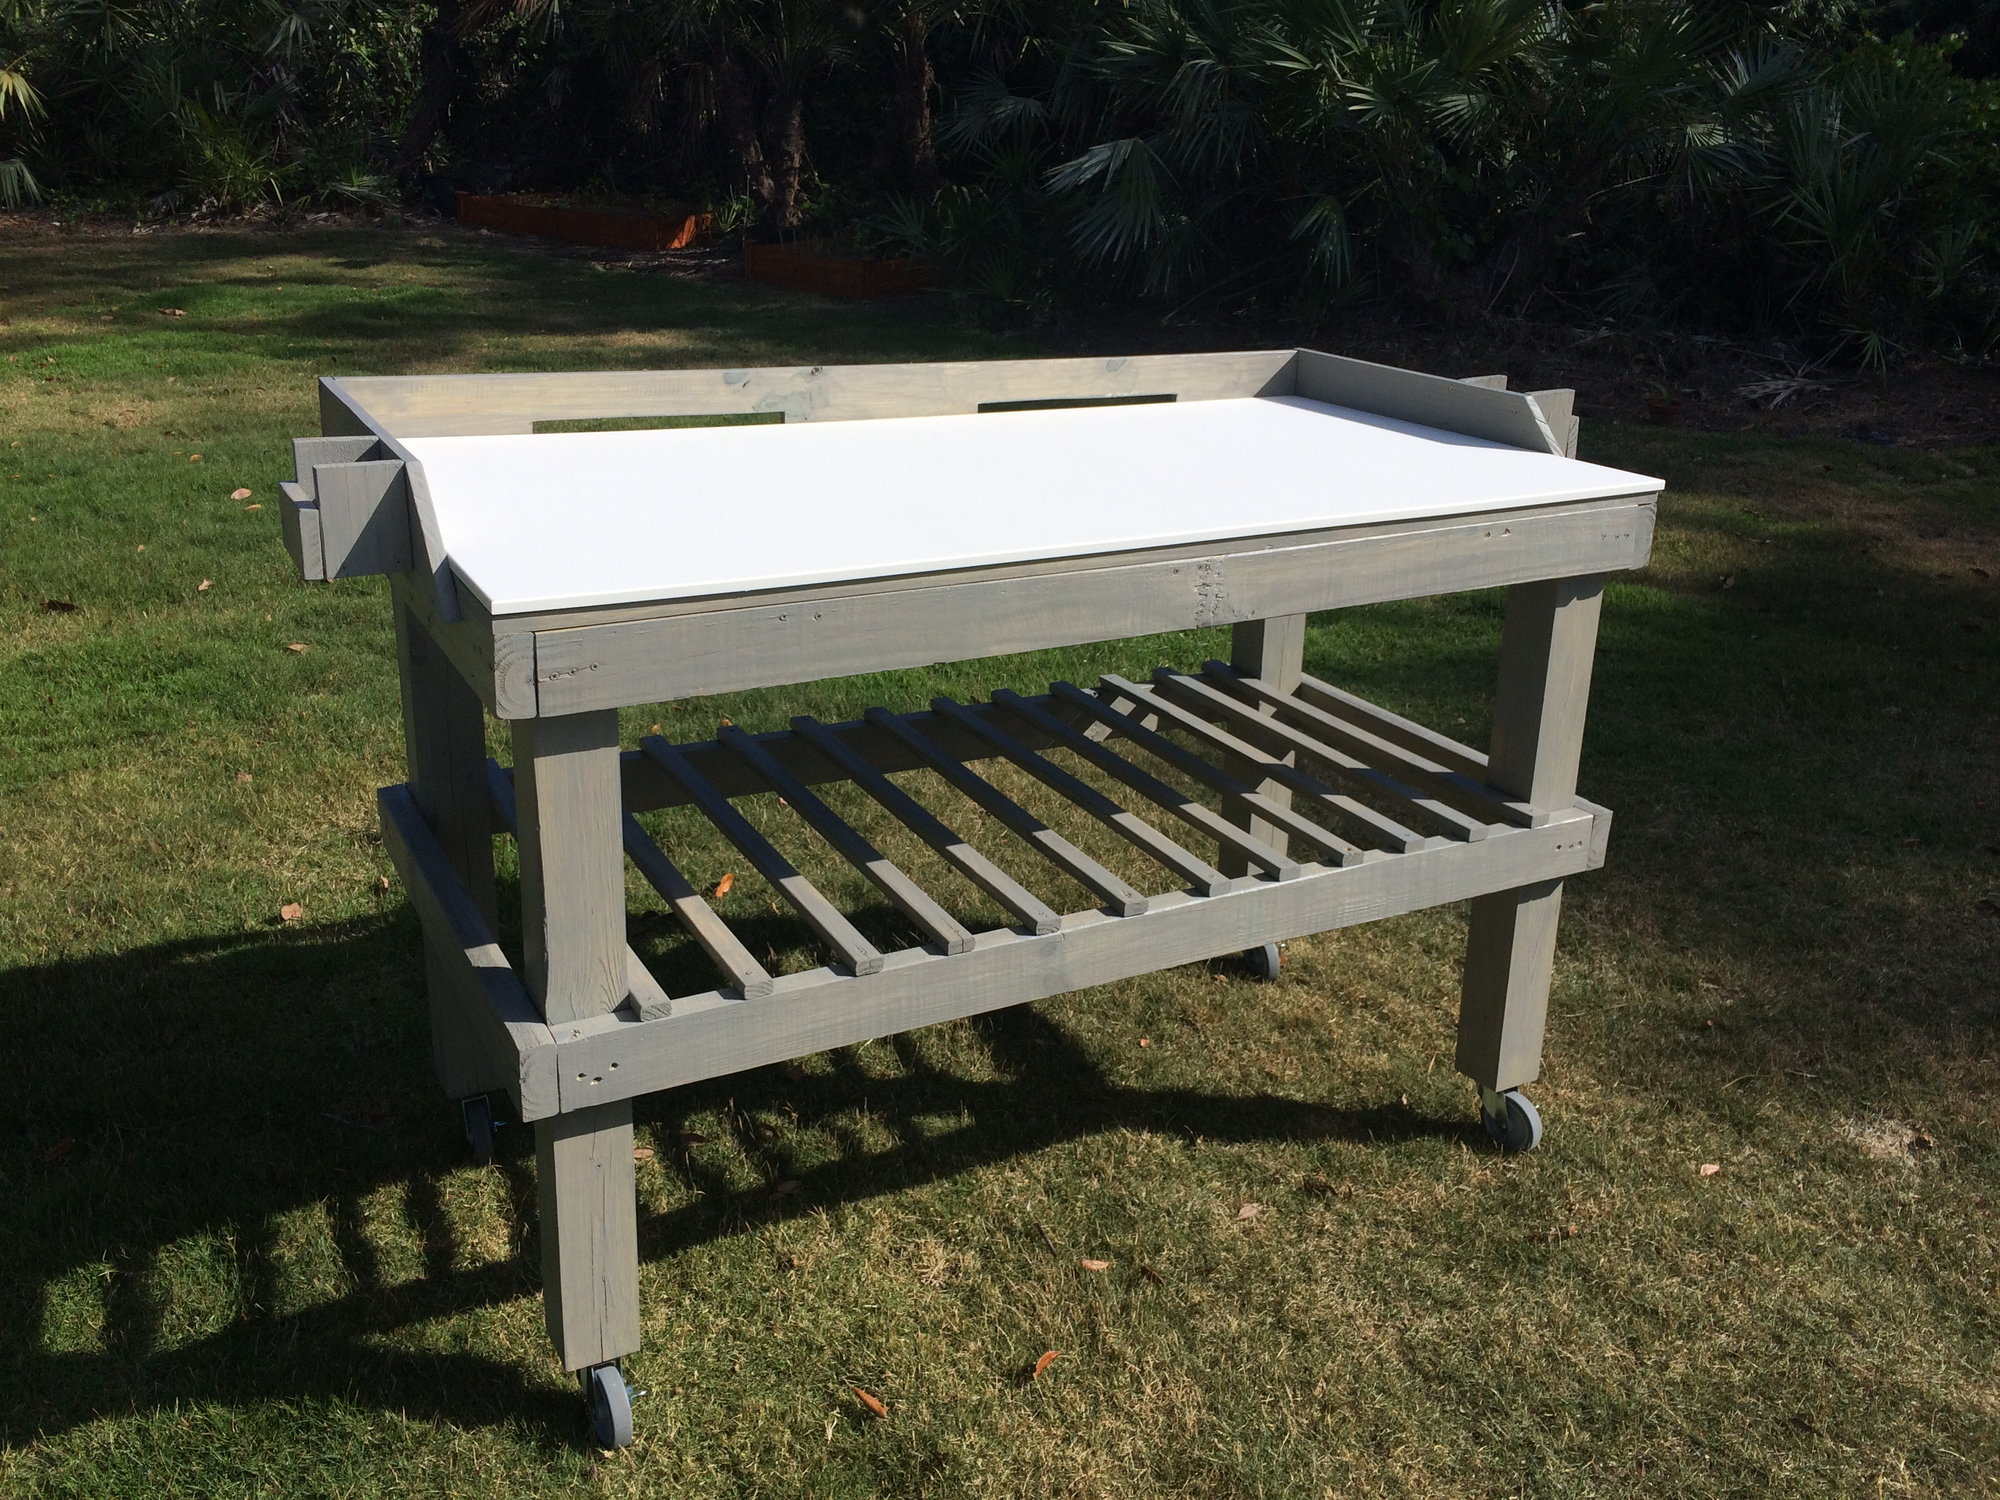 Homemade fish cleaning table - The Hull Truth - Boating and